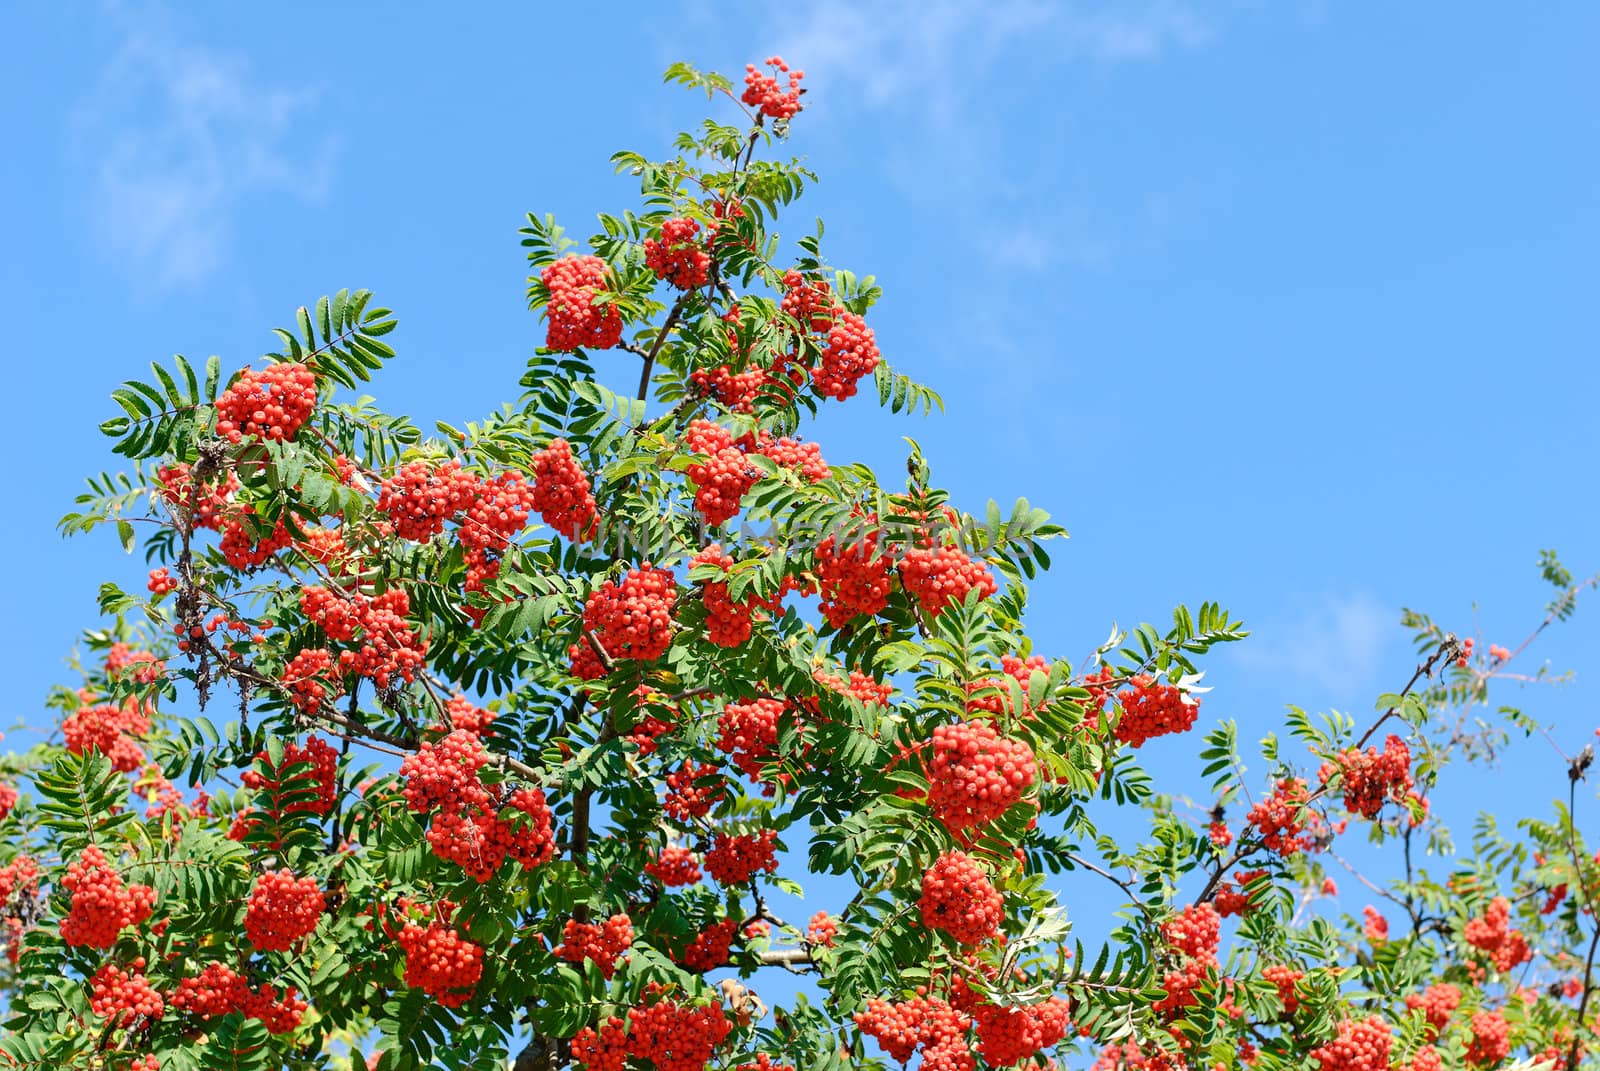 Rowan tree heavy with berries against blue sky with wiffs of clouds.
